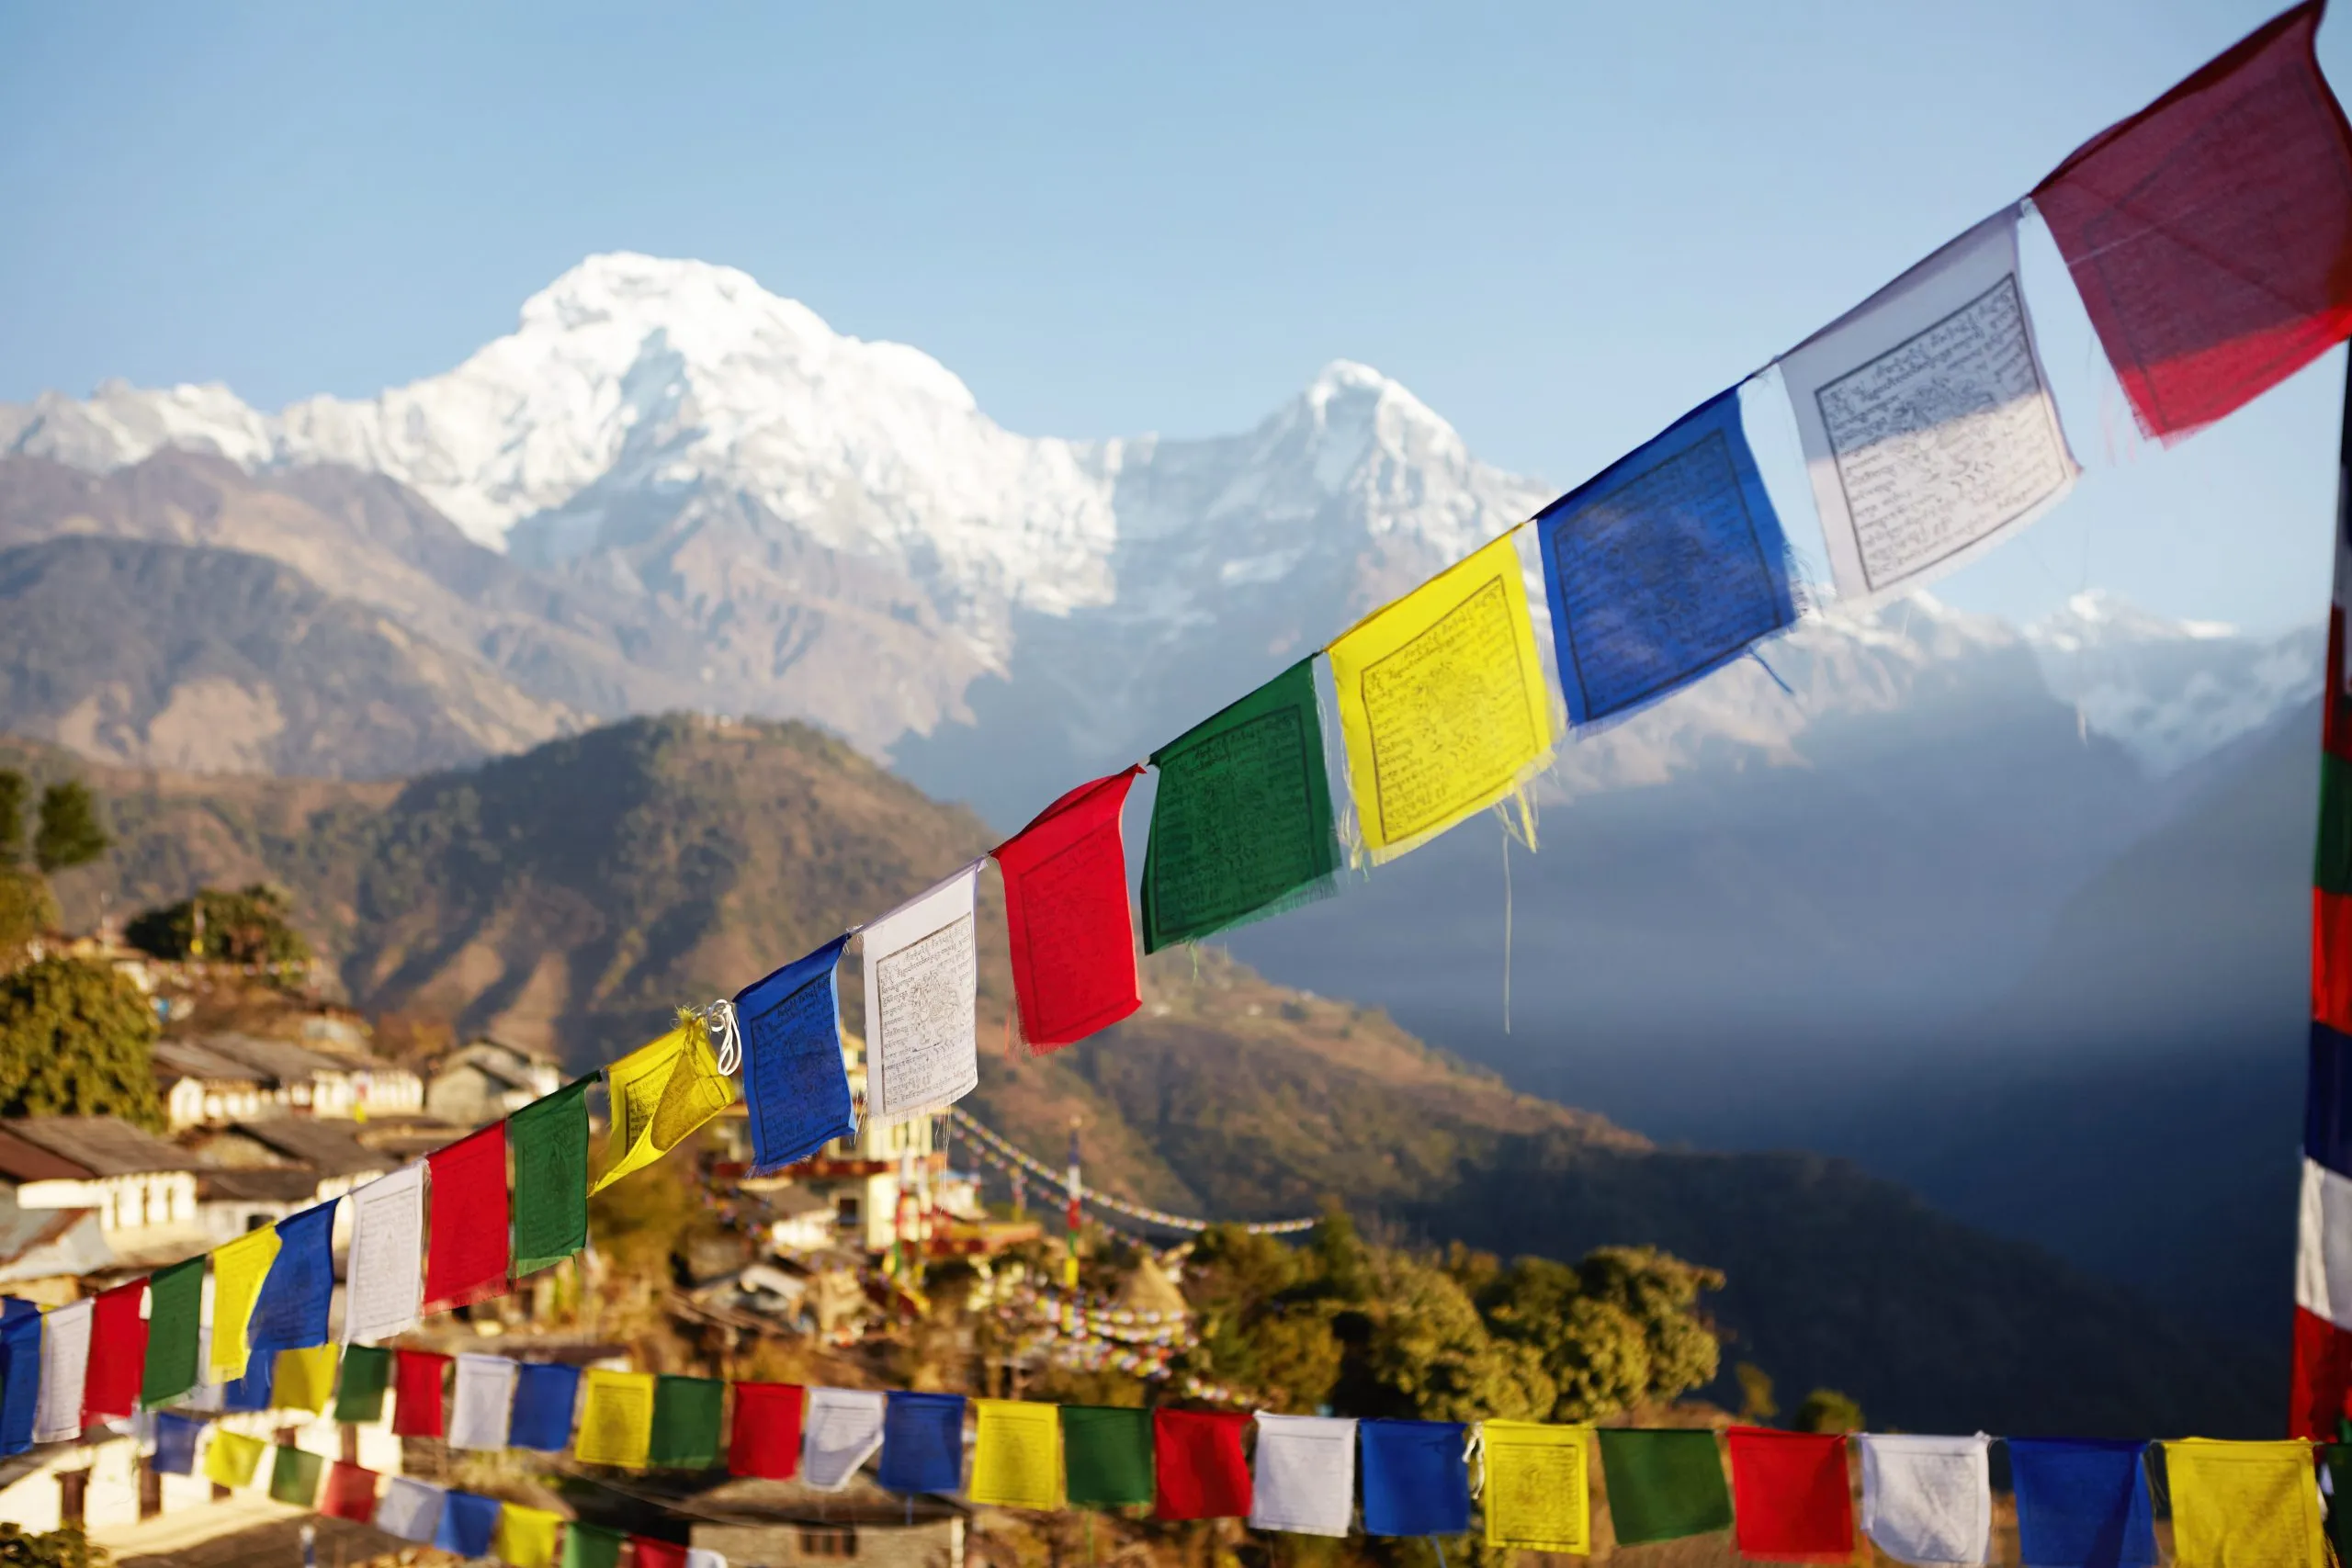 Spectacular view of grand snow capped summits of the Himalayan mountain range rising above in background, with rows of colorful Buddhist prayer flags strung along mountain passes in foreground